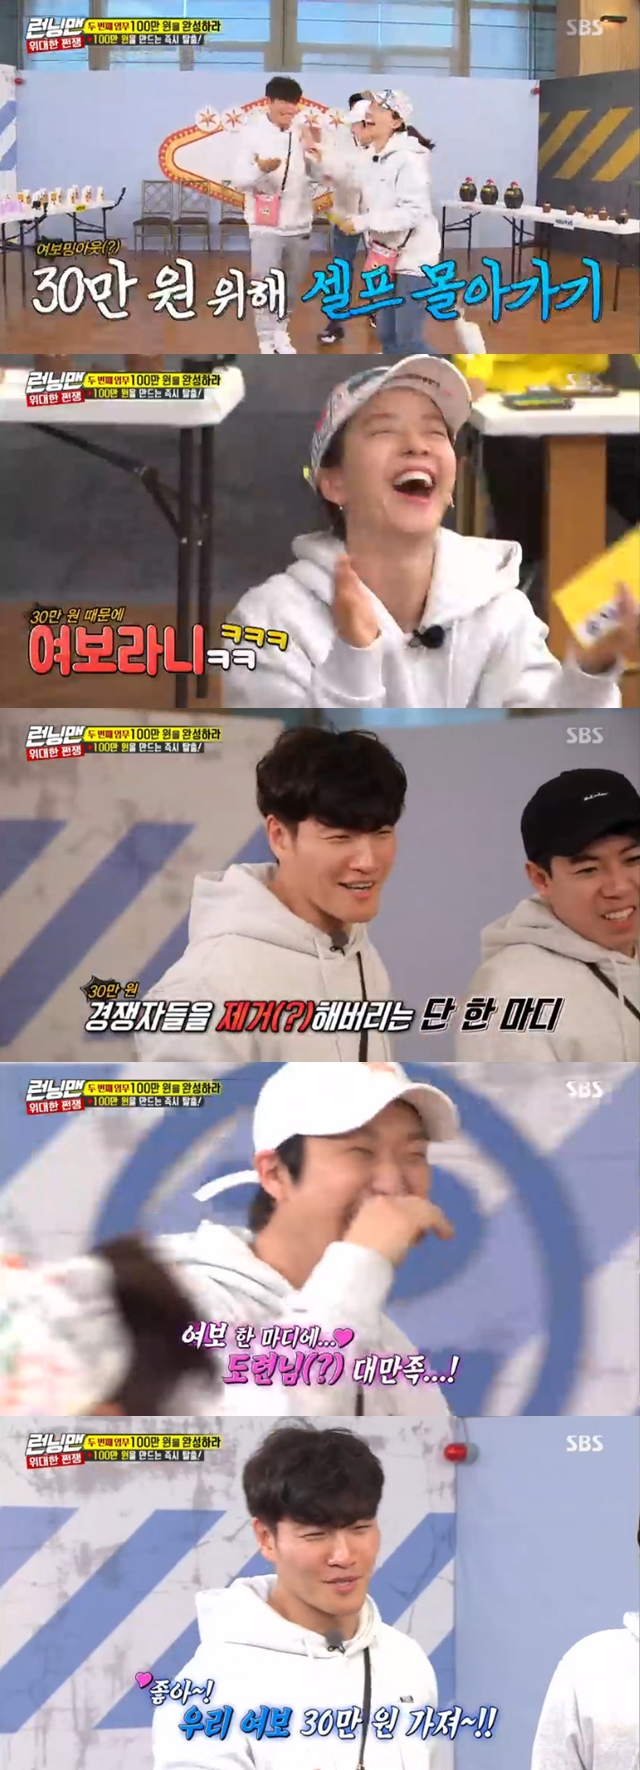 Kim Jong-kook called Song Ji-hyo honeyOn February 24, SBS Running Man was held at the end of the Great Heart race, in which one person with the most money won.The second mission of the members is to have 1 million won as Uncle Tong mission.Lee Kwang-soo, Yoo Jae-Suk, and Jeon So-min succeeded in the mission in turn and escaped the room, and Song Ji-hyo also won 1 million won with the success of Uncle Tong mission.The members begging began, and Kim Jong-kook, who was quiet, demanded 300,000 won without any hesitation and shouted honey toward Song Ji-hyo, which surprised everyone.It was a word that removed the competitors.bak-beauty